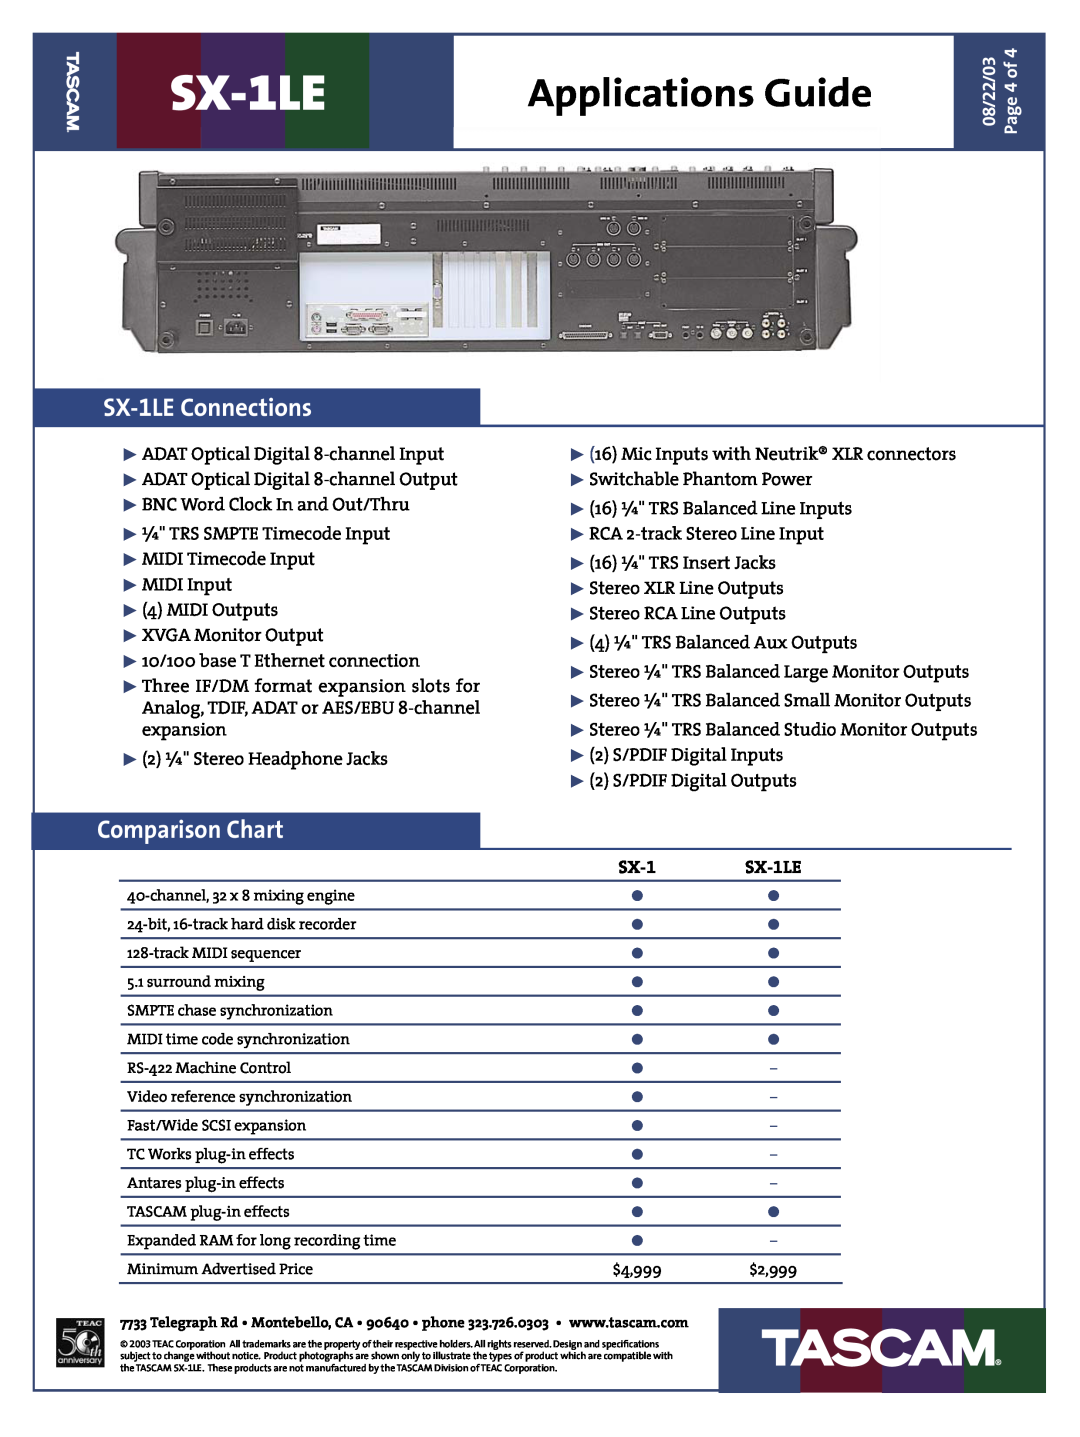 Tascam dimensions SX-1LEConnections, Comparison Chart, Applications Guide, 08/22/03, Page4 of 